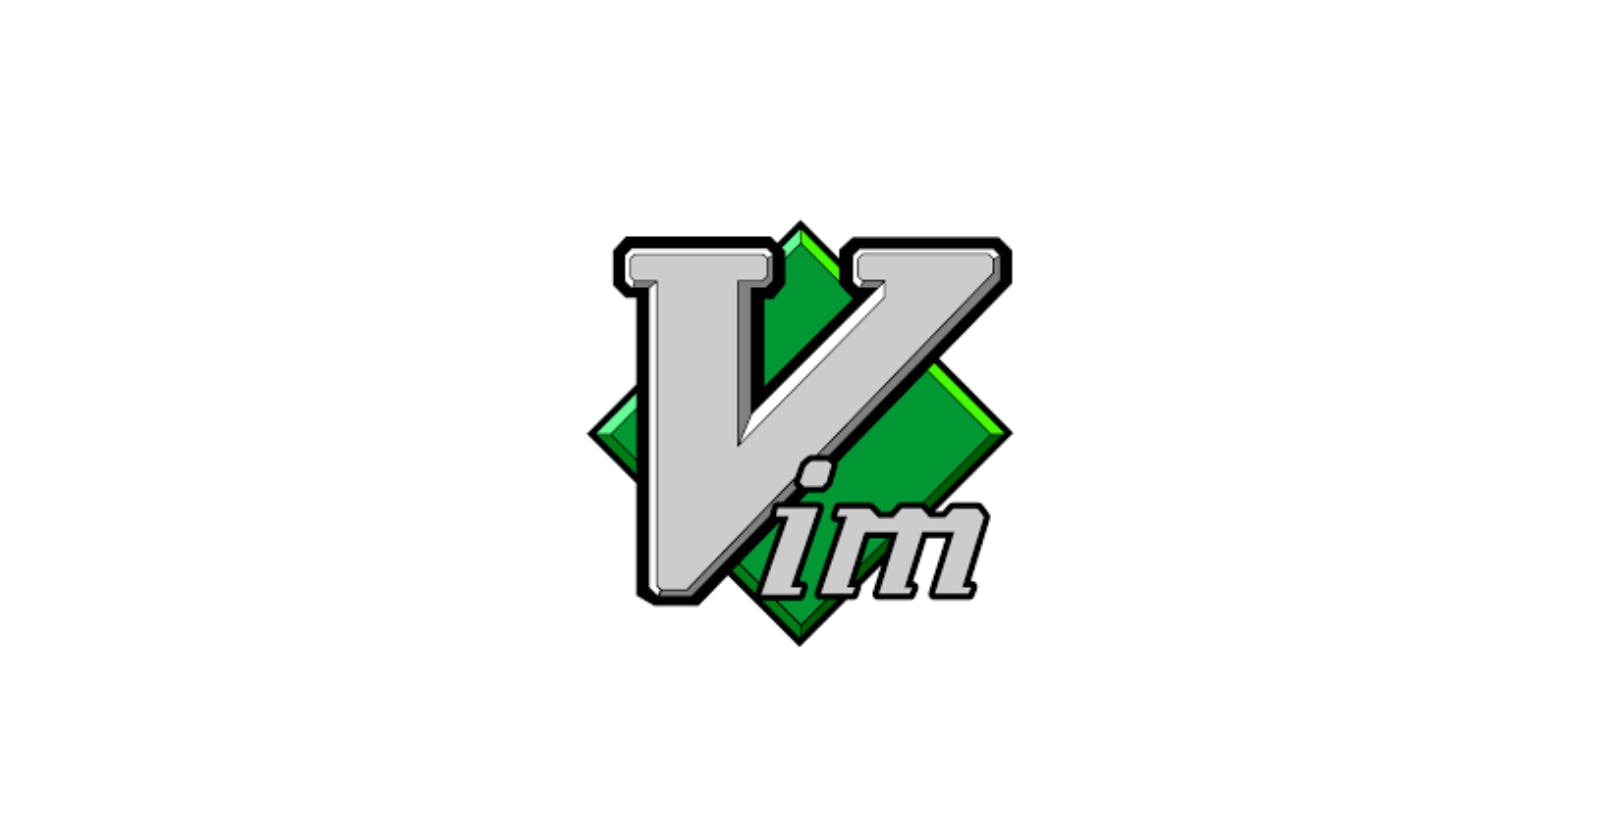 VIM for linux ( File editing and handling)